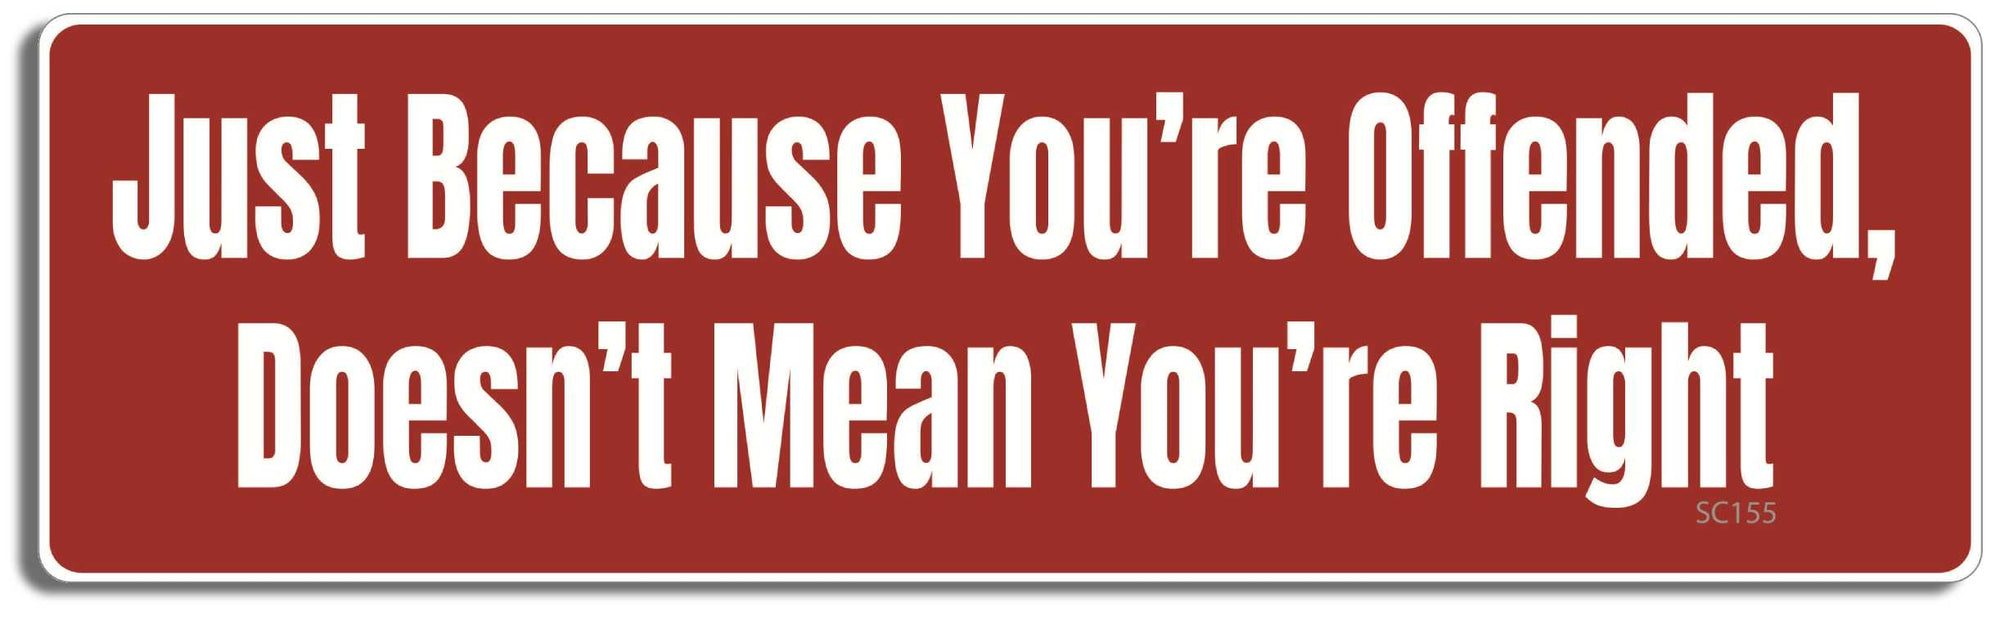 Just because you're offended, doesn't mean you're right - 3" x 10" -  Decal political Bumper Sticker Car Magnet Just because you're offended, doesn't-  Decal for carsconservative, liberal, outraged, Politics, republican